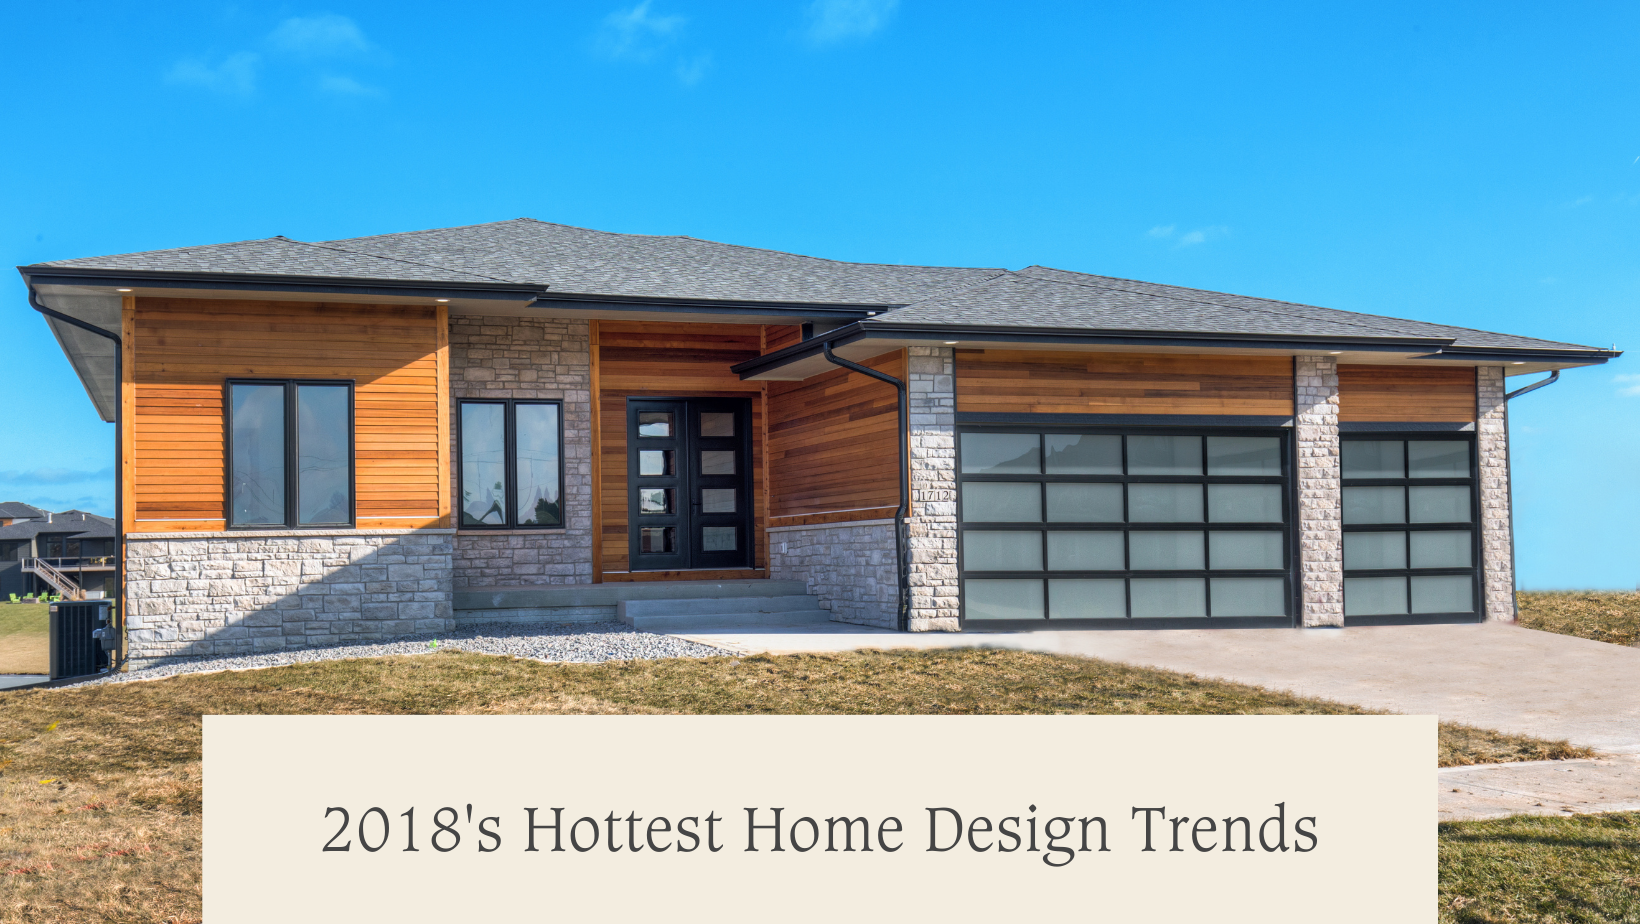 2018’s Hottest Home Design Trends